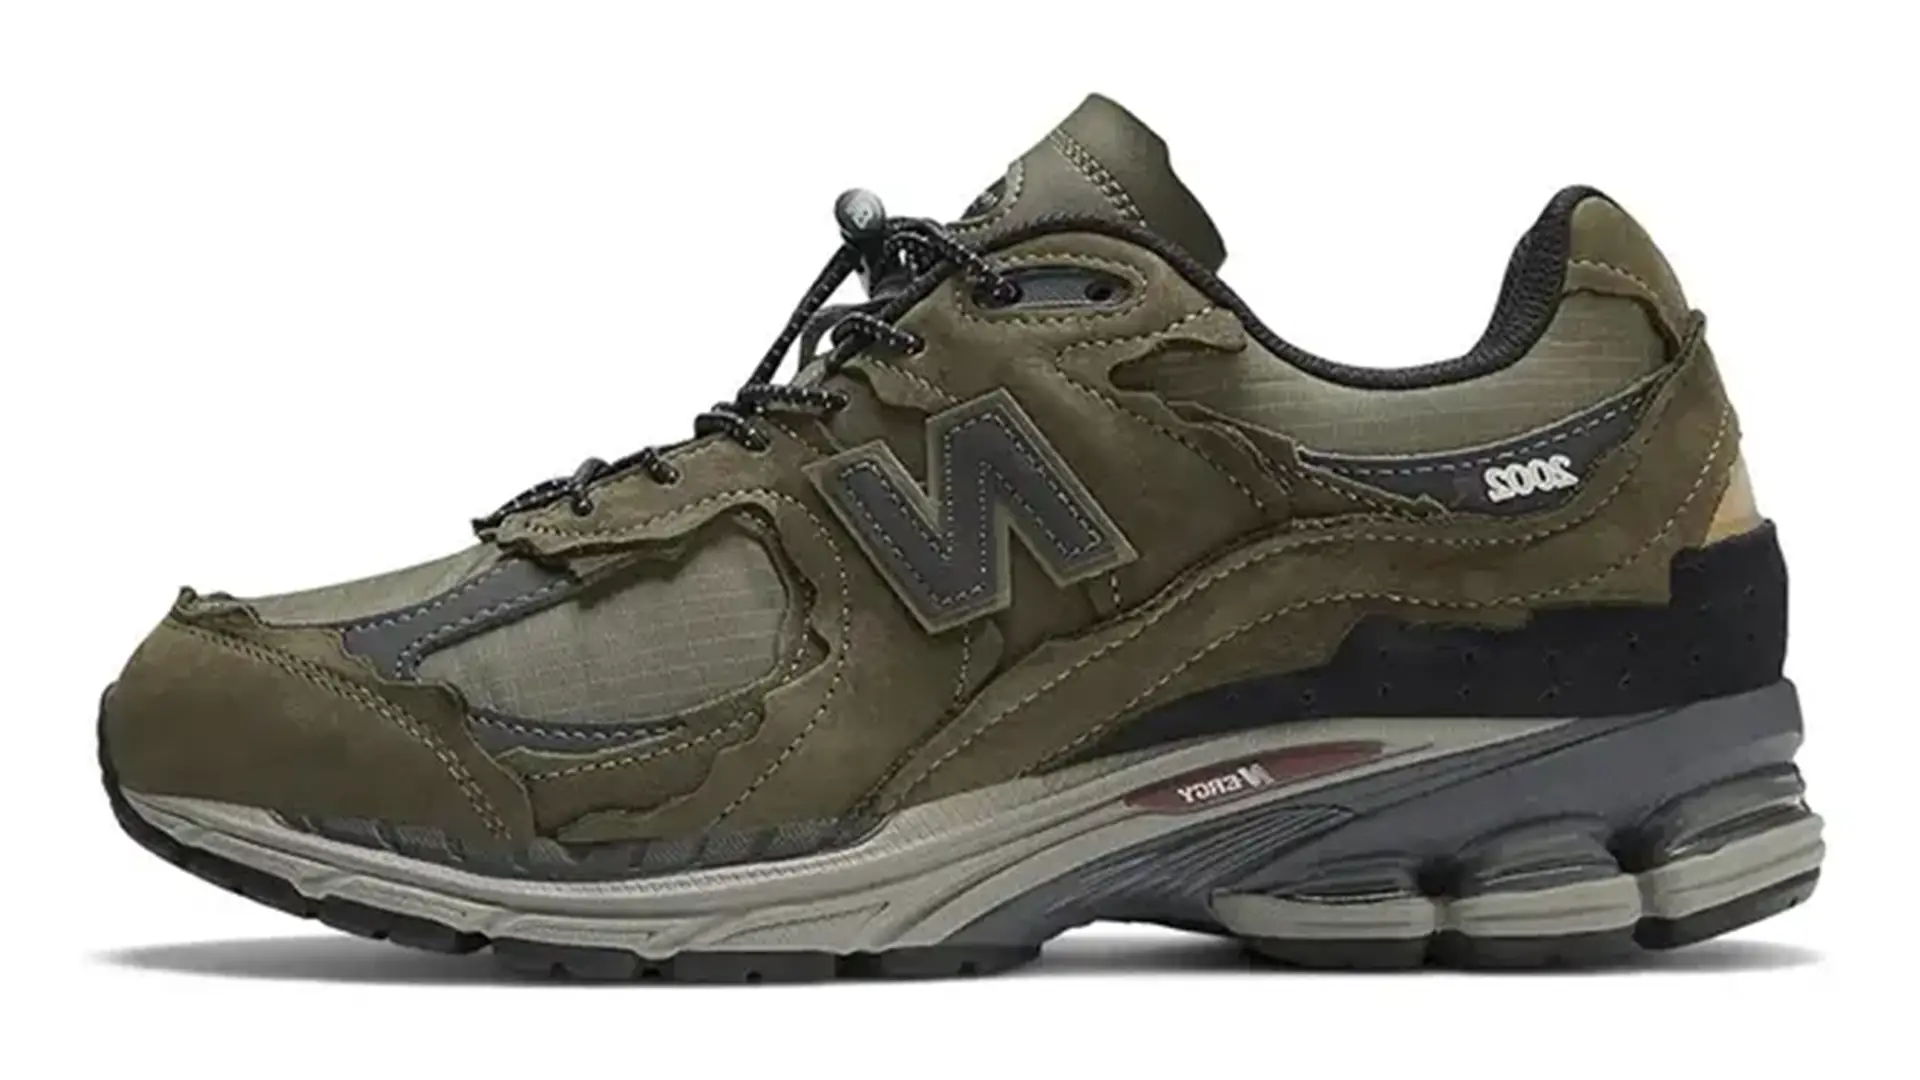 New Balance Roav Trail WTROVSC1 Protection Pack Gets an Autumn-Ready Update